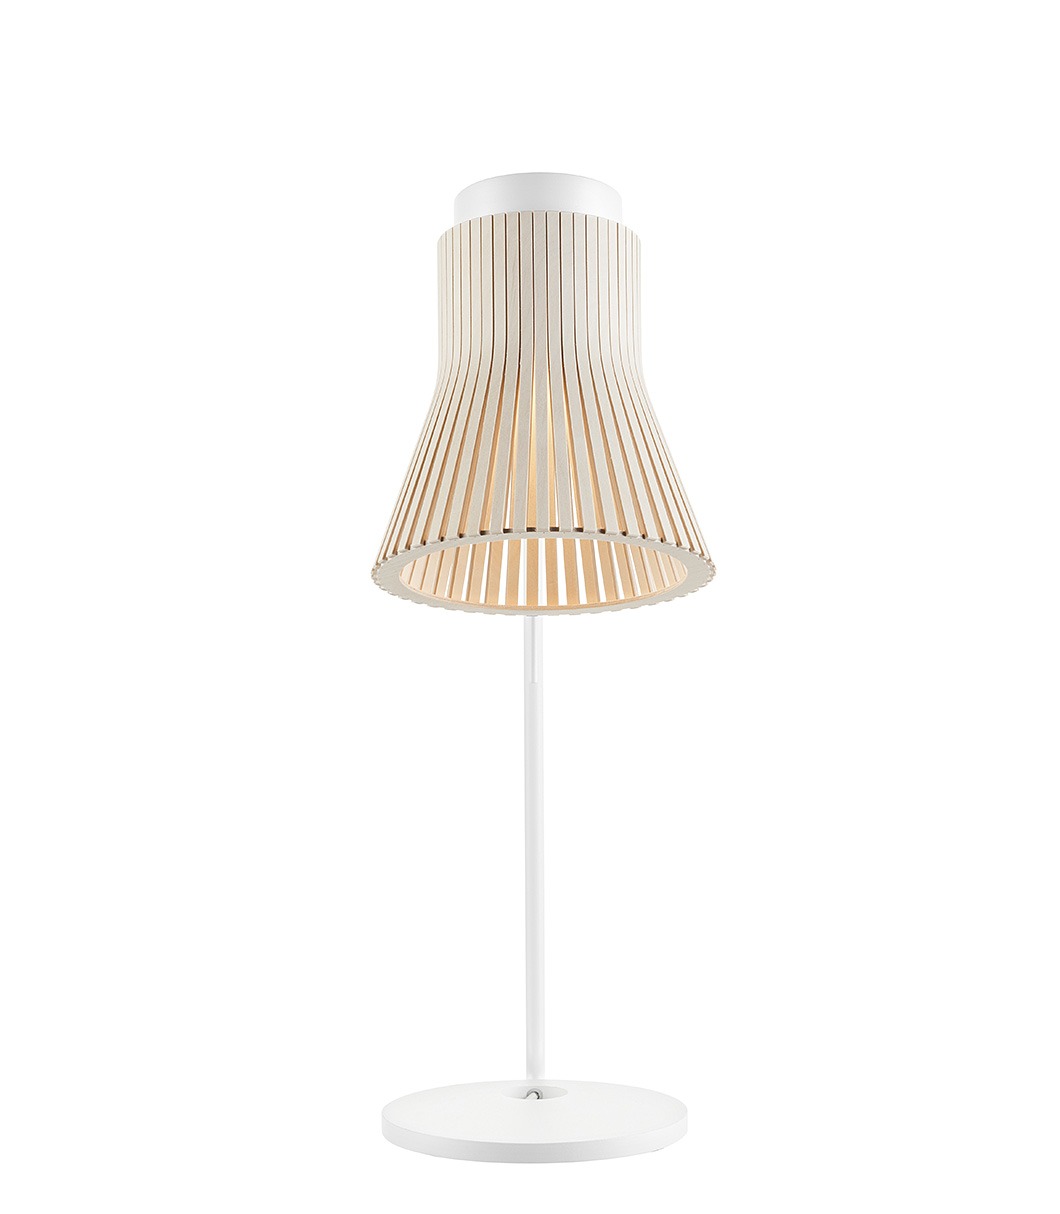 Petite 4620 table lamp is available in natural birch